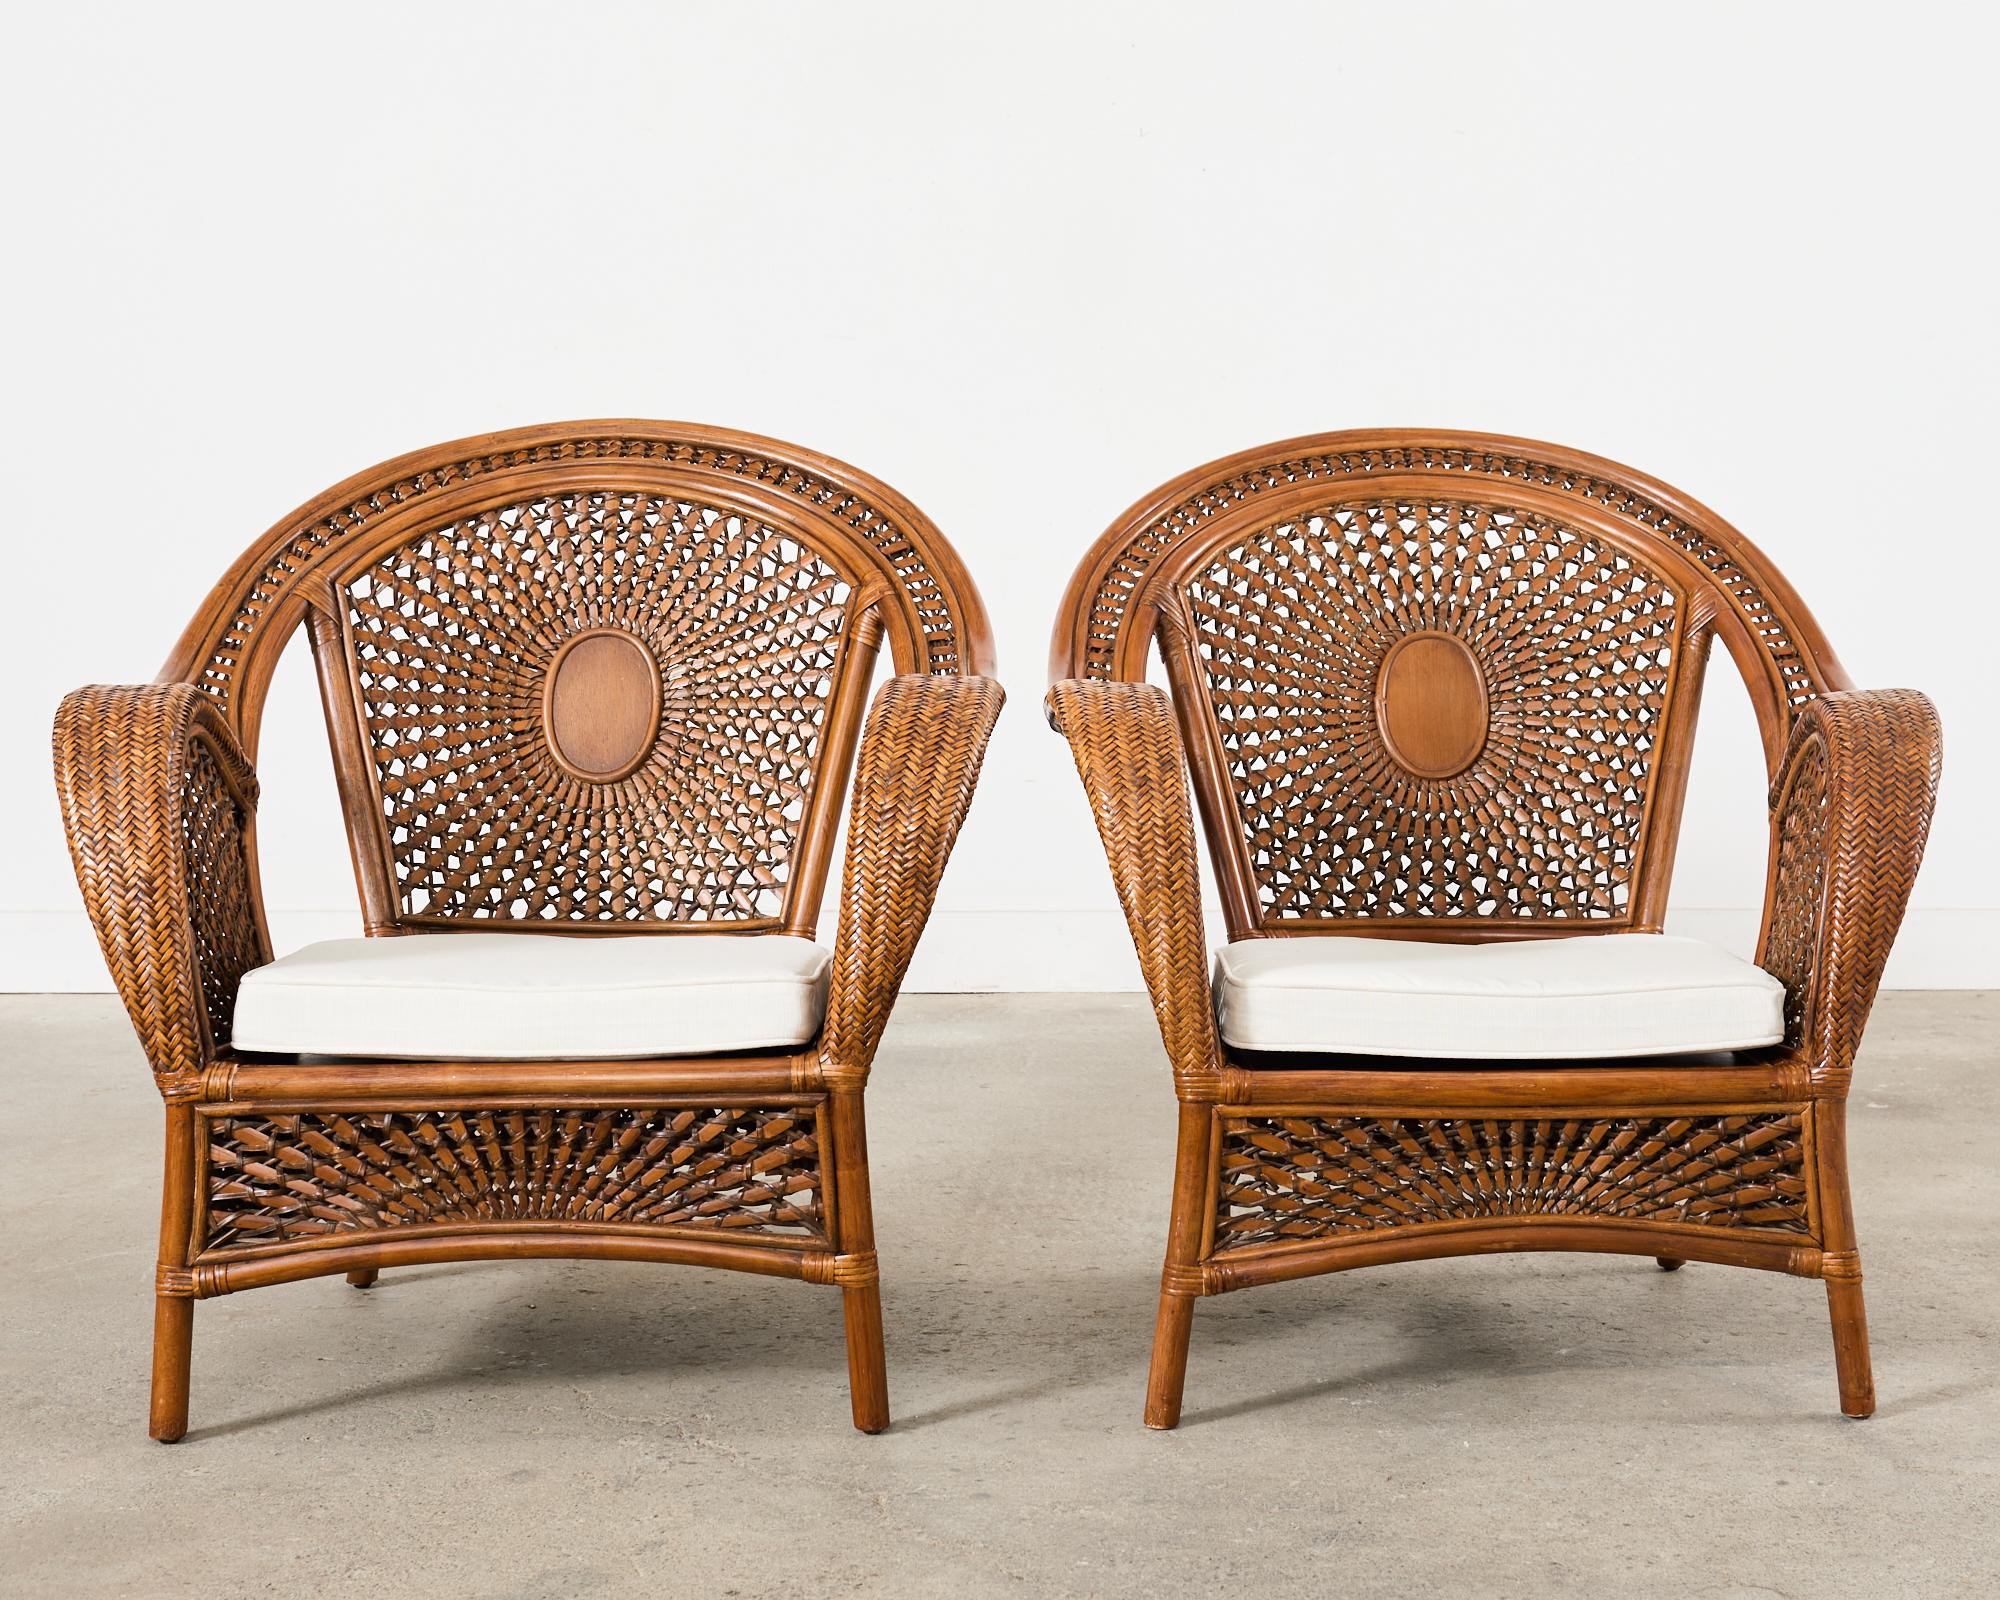 Hand-Crafted Pair of Bohemian Peacock Style Rattan Wicker Lounge Chairs